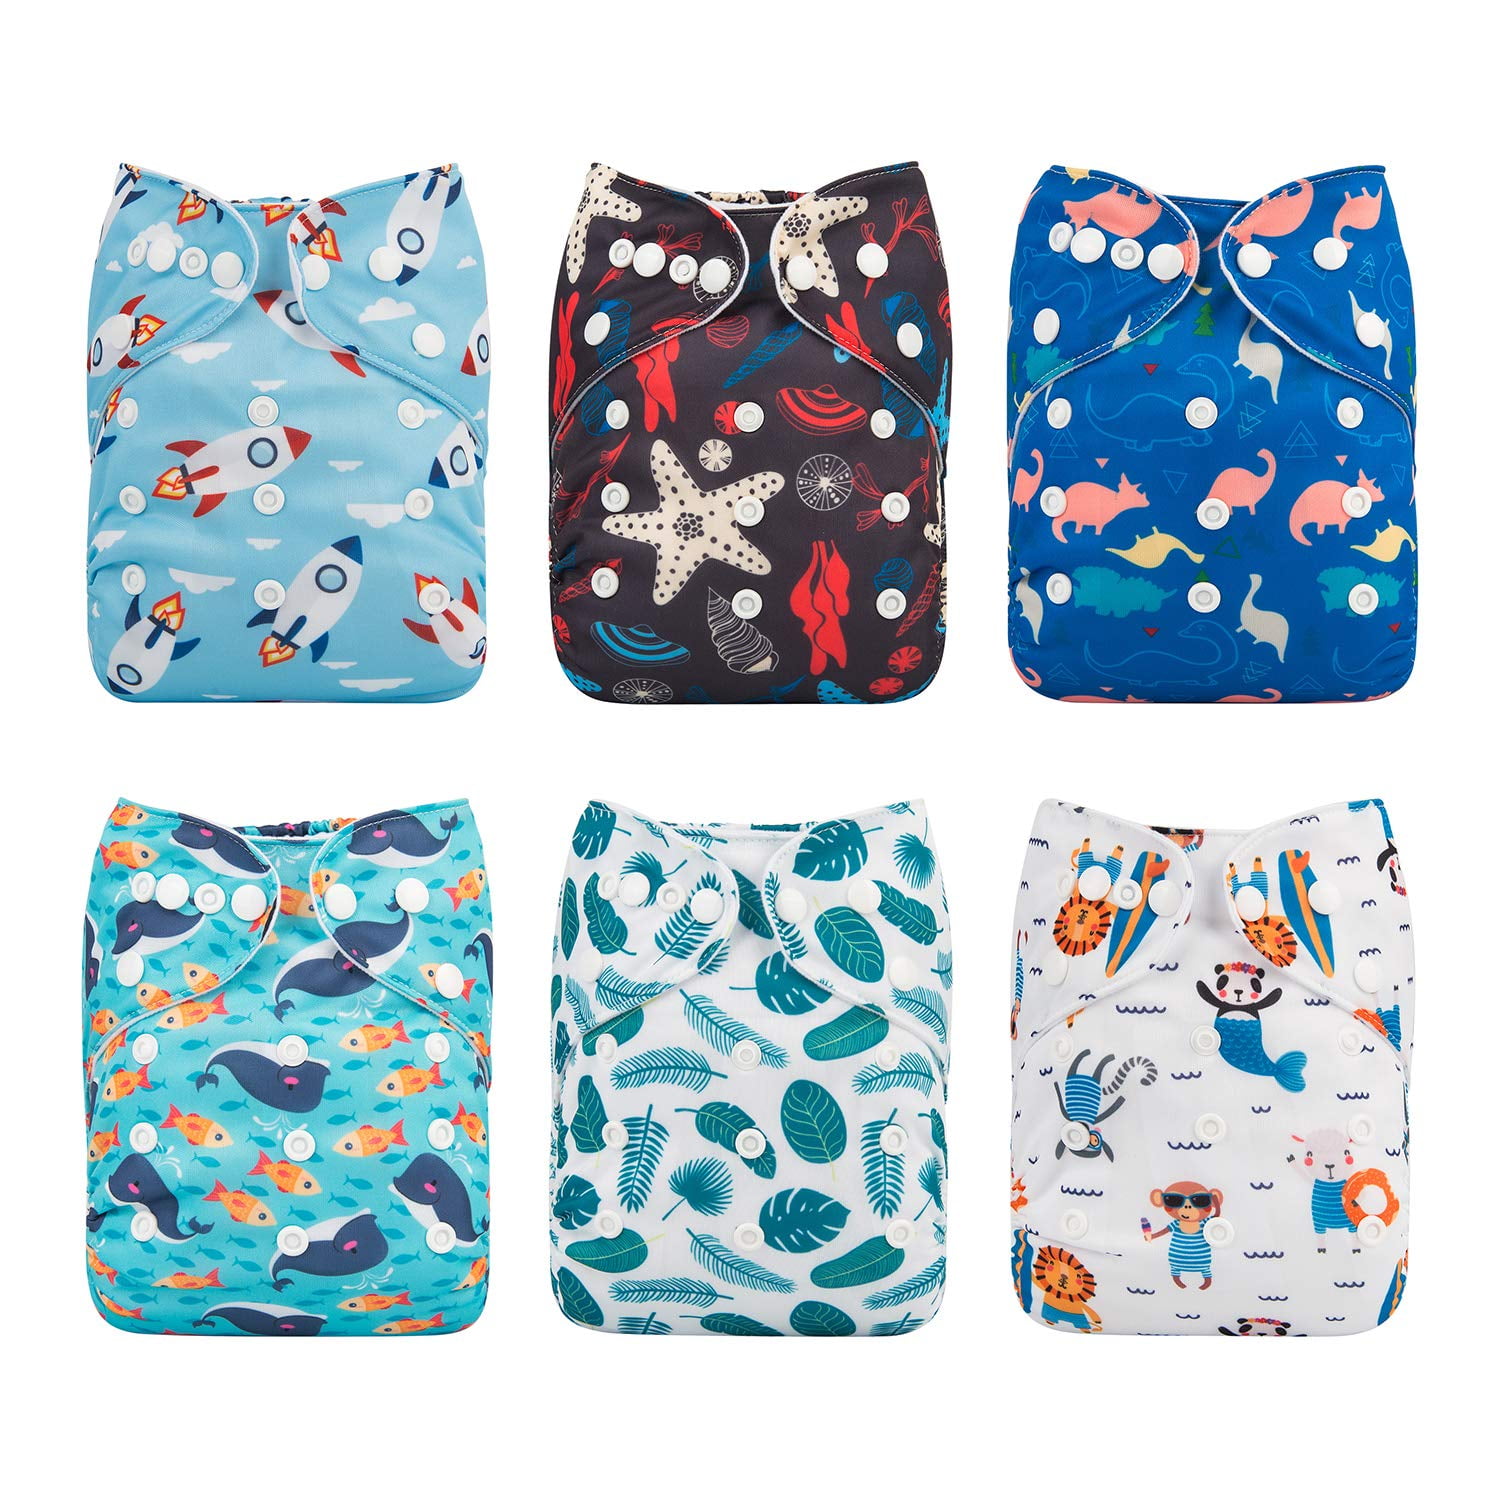 1 Newborn AIO Cloth Diaper Nappy Charcoal Insert Night Washable Resuable Animal 